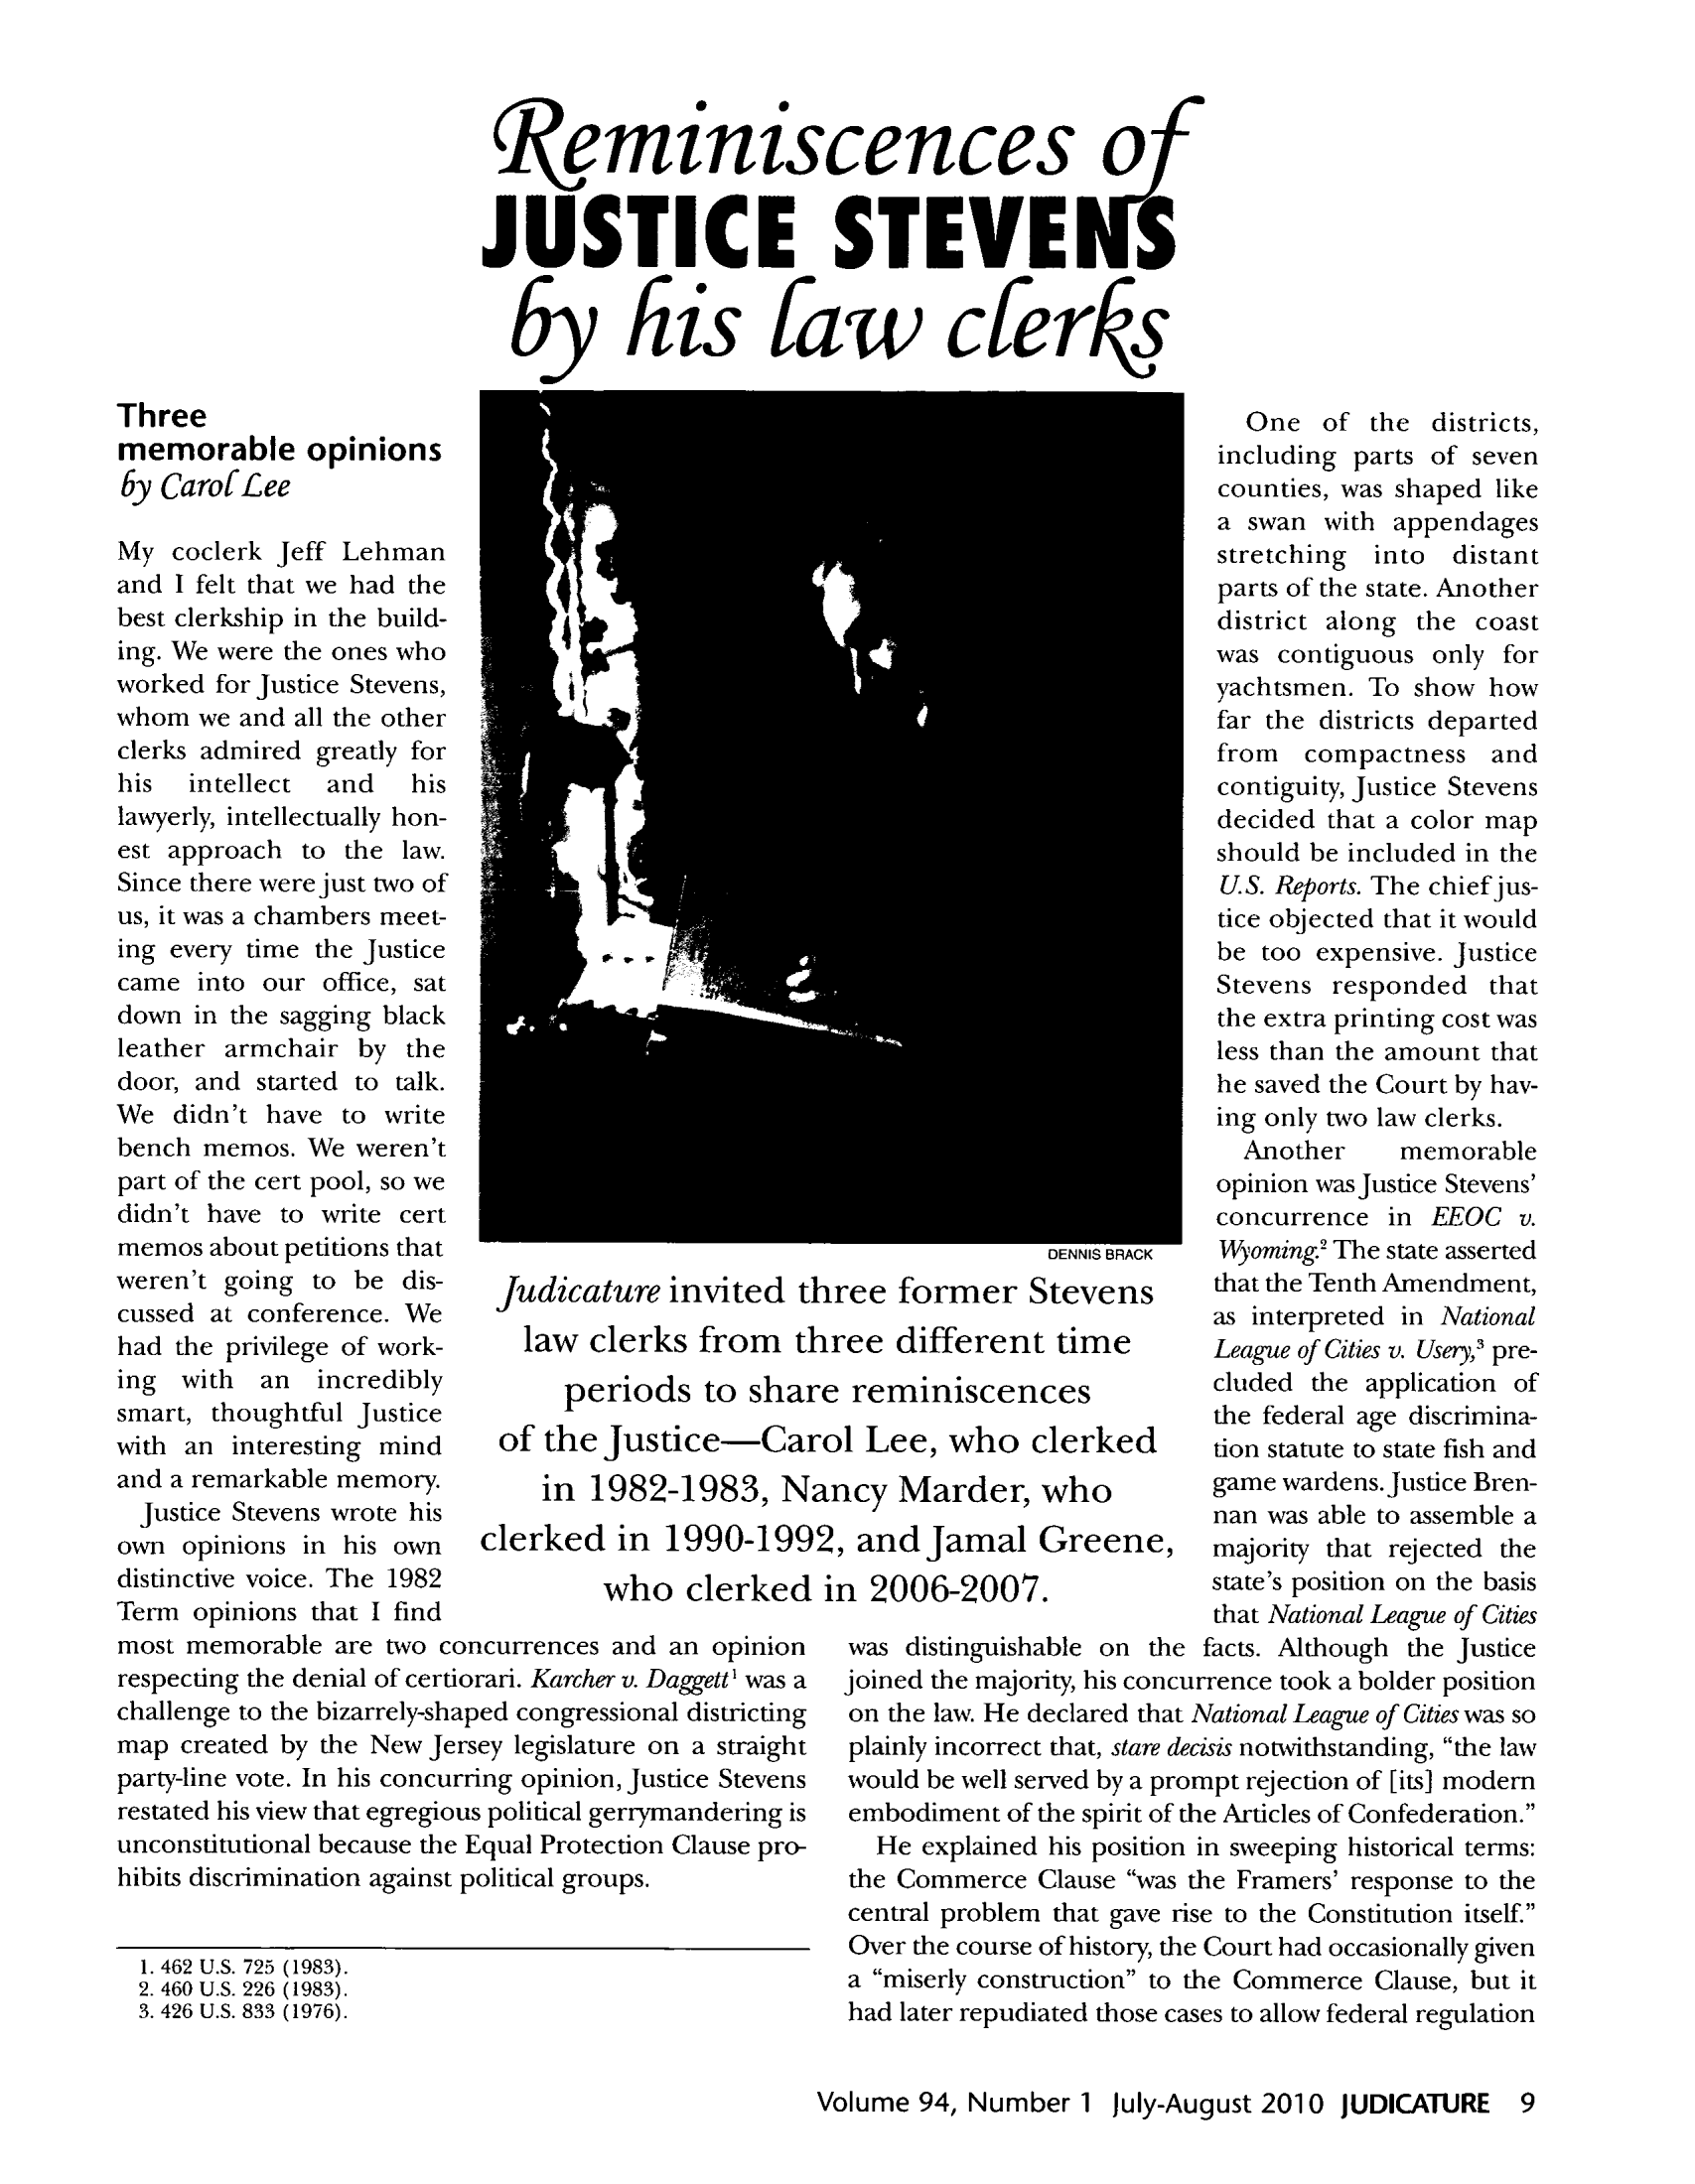 handle is hein.journals/judica94 and id is 9 raw text is: Reminiscences oJUSTICE STEVE Sby his faw cferksThreememorable opinionsby CarofLeeMy coclerk Jeff Lehmanand I felt that we had thebest clerkship in the build-ing. We were the ones whoworked for Justice Stevens,whom we and all the otherclerks admired greatly forhis  intellect  and  hislawyerly, intellectually hon-est approach to the law.Since there were just two ofus, it was a chambers meet-ing every time the Justicecame into our office, satdown in the sagging blackleather armchair by thedoor, and started to talk.We didn't have to writebench memos. We weren'tpart of the cert pool, so wedidn't have to write certmemos about petitions thatweren't going to be dis-cussed at conference. Wehad the privilege of work-ing with an incrediblysmart, thoughtful Justicewith an interesting mindand a remarkable memory.Justice Stevens wrote hisown opinions in his owndistinctive voice. The 1982Term opinions that I findJudicature invited thilaw clerks from thrperiods to shareof the Justice-Caroin 1982-1983, Narclerked in 1990-1992,who clerked iimost memorable are two concurrences and an opinionrespecting the denial of certiorari. Karcher v. Daggett' was achallenge to the bizarrely-shaped congressional districtingmap created by the New Jersey legislature on a straightparty-line vote. In his concurring opinion, Justice Stevensrestated his view that egregious political gerrymandering isunconstitutional because the Equal Protection Clause pro-hibits discrimination against political groups.1. 462 U.S. 725 (1983).2. 460 U.S. 226 (1983).3. 426 U.S. 833 (1976).One of the districts,including parts of sevencounties, was shaped likea swan with appendagesstretching into distantparts of the state. Anotherdistrict along the coastwas contiguous only foryachtsmen. To show howfar the districts departedfrom compactness andcontiguity, Justice Stevensdecided that a color mapshould be included in theU.S. Reports. The chief jus-tice objected that it wouldbe too expensive. JusticeStevens responded thatthe extra printing cost wasless than the amount thathe saved the Court by hav-ing only two law clerks.Another     memorableopinion wasJustice Stevens'concurrence in EEOC v.DENNIS BRACK  Wyoming The state assertedee former Stevens          that the Tenth Amendment,as interpreted in National'ee different time         League of Cities v. Usery? pre-reminiscences              cluded the application ofLthe federal age discmina-1  IeW o   lre         tion statute to state fish andicy Marder, who            game wardens.Justice Bren-nan was able to assemble aandJamal Greenet, majority that rejected theri 2006-2007.              state's position on the basisthat National League of Citieswas distinguishable on the facts. Although the justicejoined the majority, his concurrence took a bolder positionon the law. He declared that National League of Cities was soplainly incorrect that, stare decisis notwithstanding, the lawwould be well served by a prompt rejection of [its] modemembodiment of the spirit of the Articles of Confederation.He explained his position in sweeping historical terms:the Commerce Clause was the Framers' response to thecentral problem that gave rise to the Constitution itself.Over the course of history, the Court had occasionally givena miserly construction to the Commerce Clause, but ithad later repudiated those cases to allow federal regulationVolume 94, Number 1 july-August 2010 JUDICATURE 9